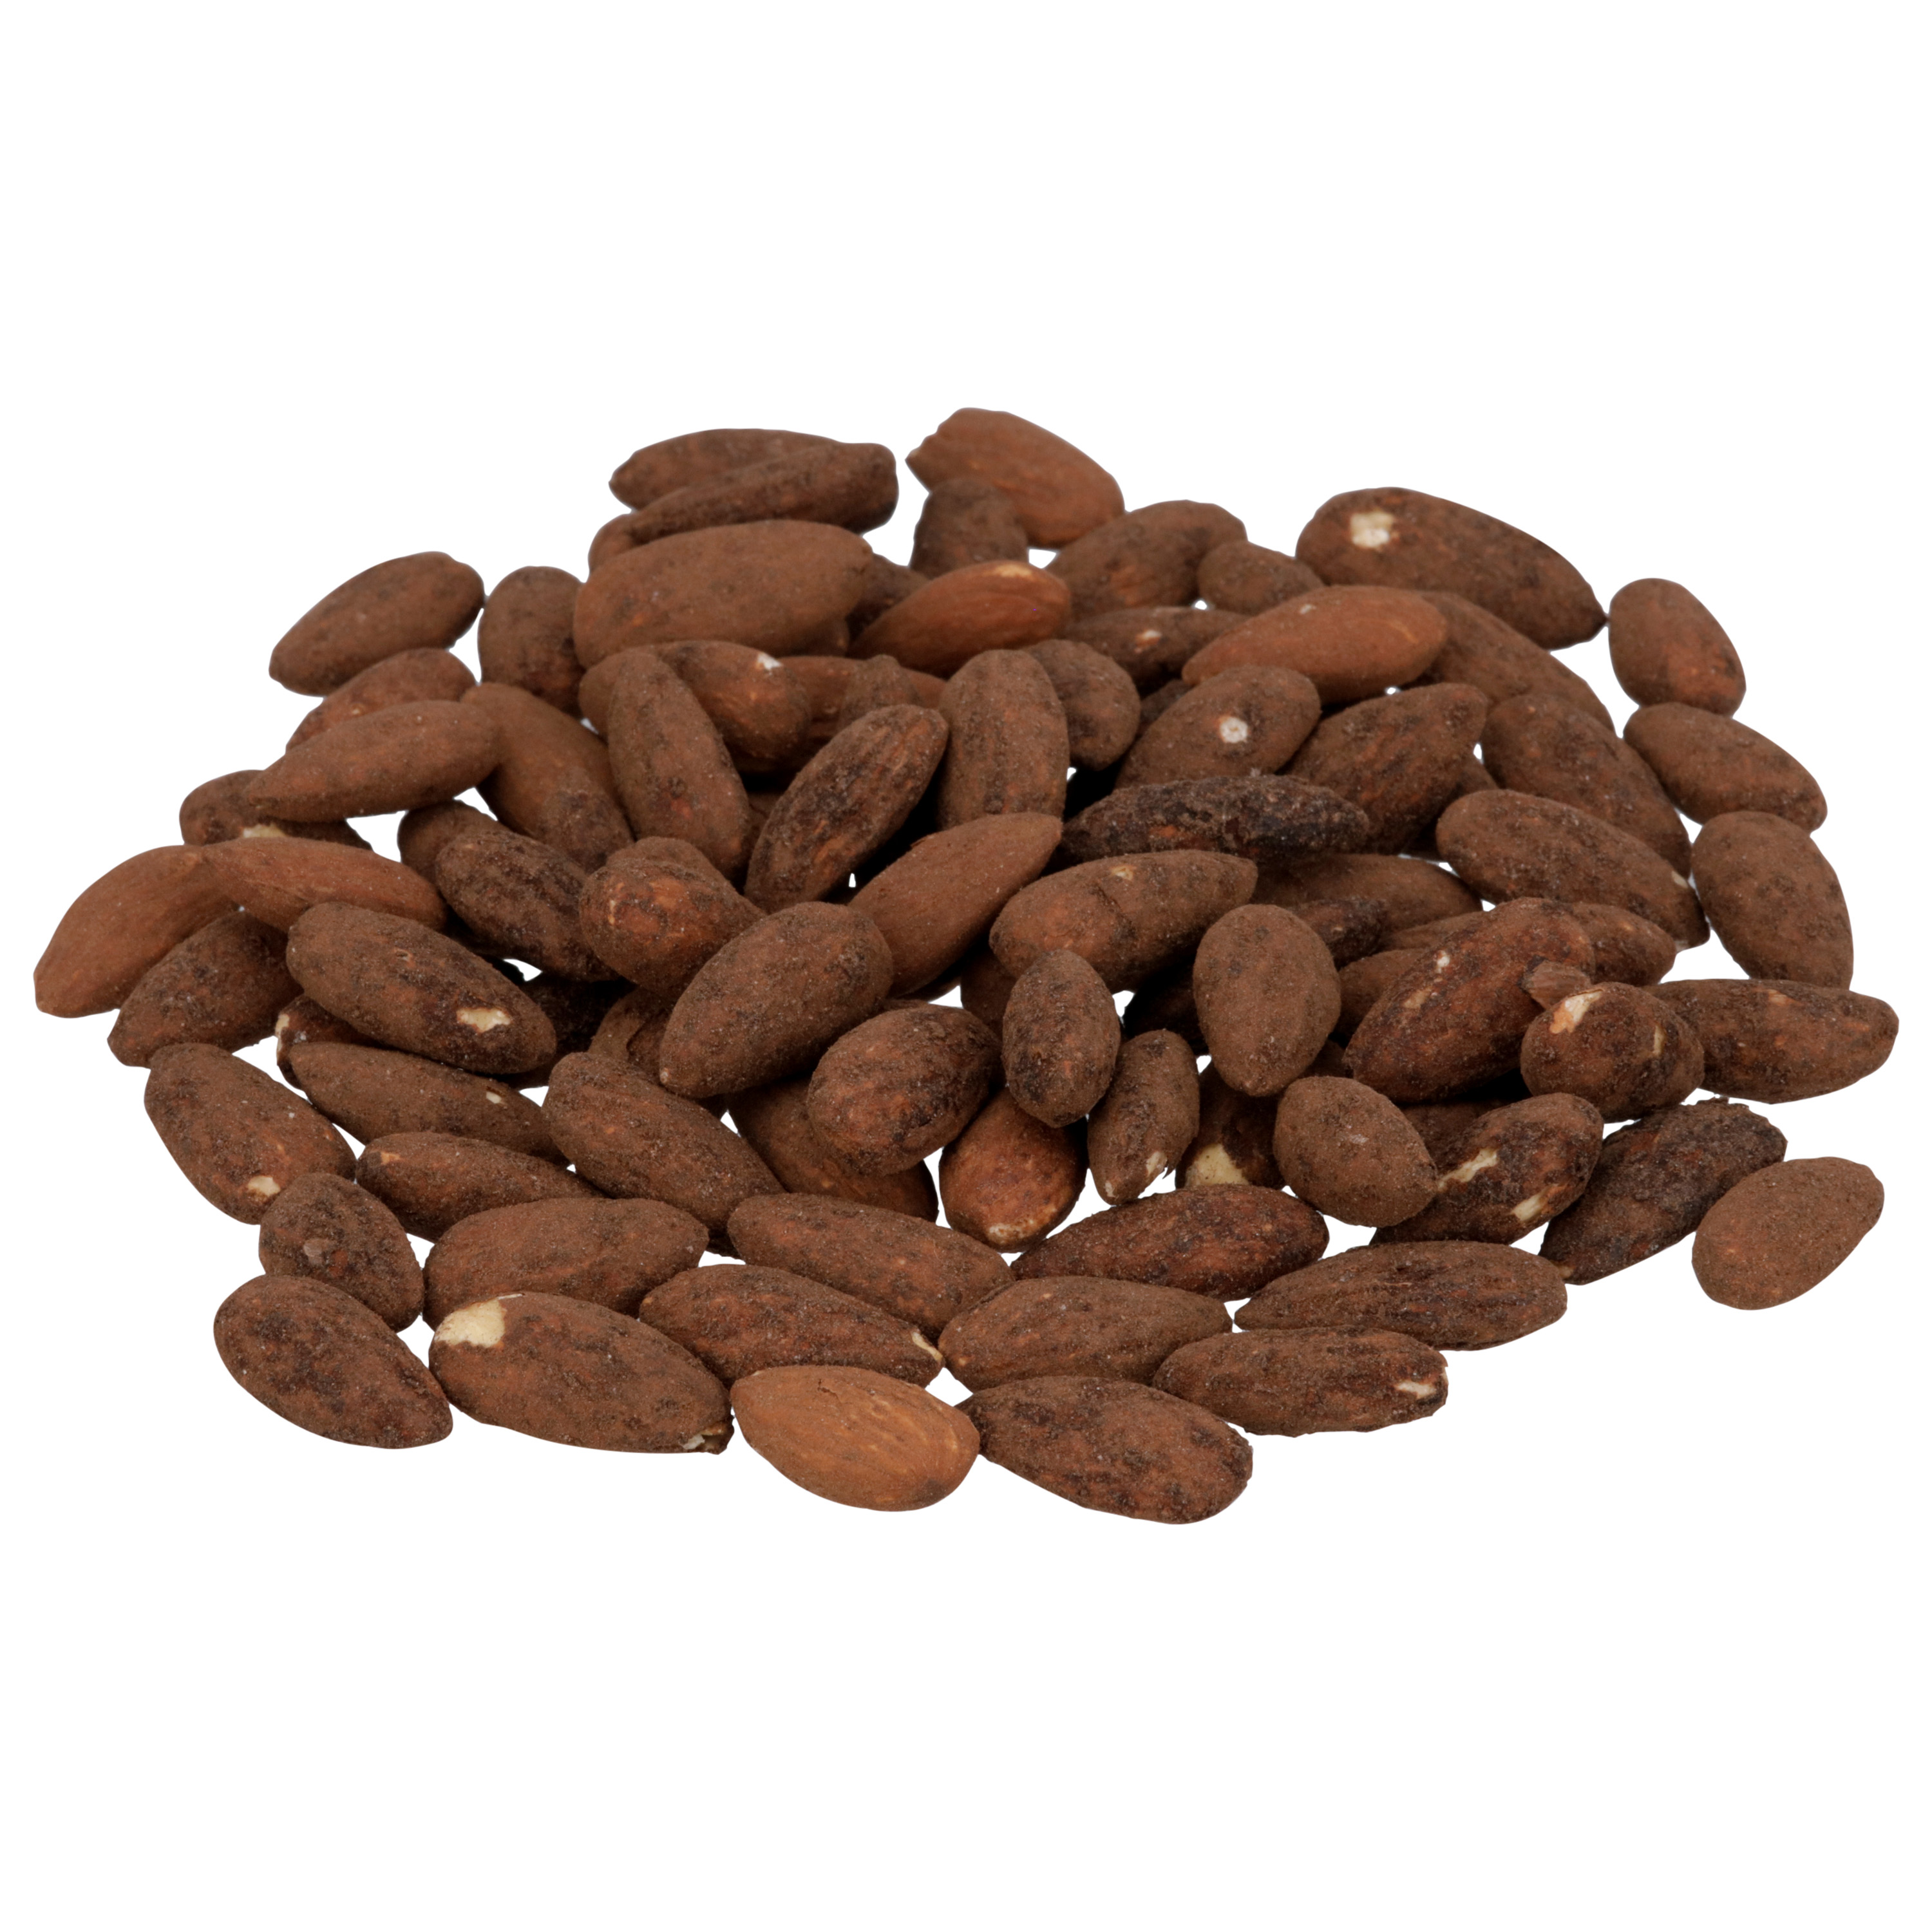 Emerald Nuts Cocoa Roast Almonds, 100 Calorie Packs, 7 Count, 4.34 oz - image 4 of 6